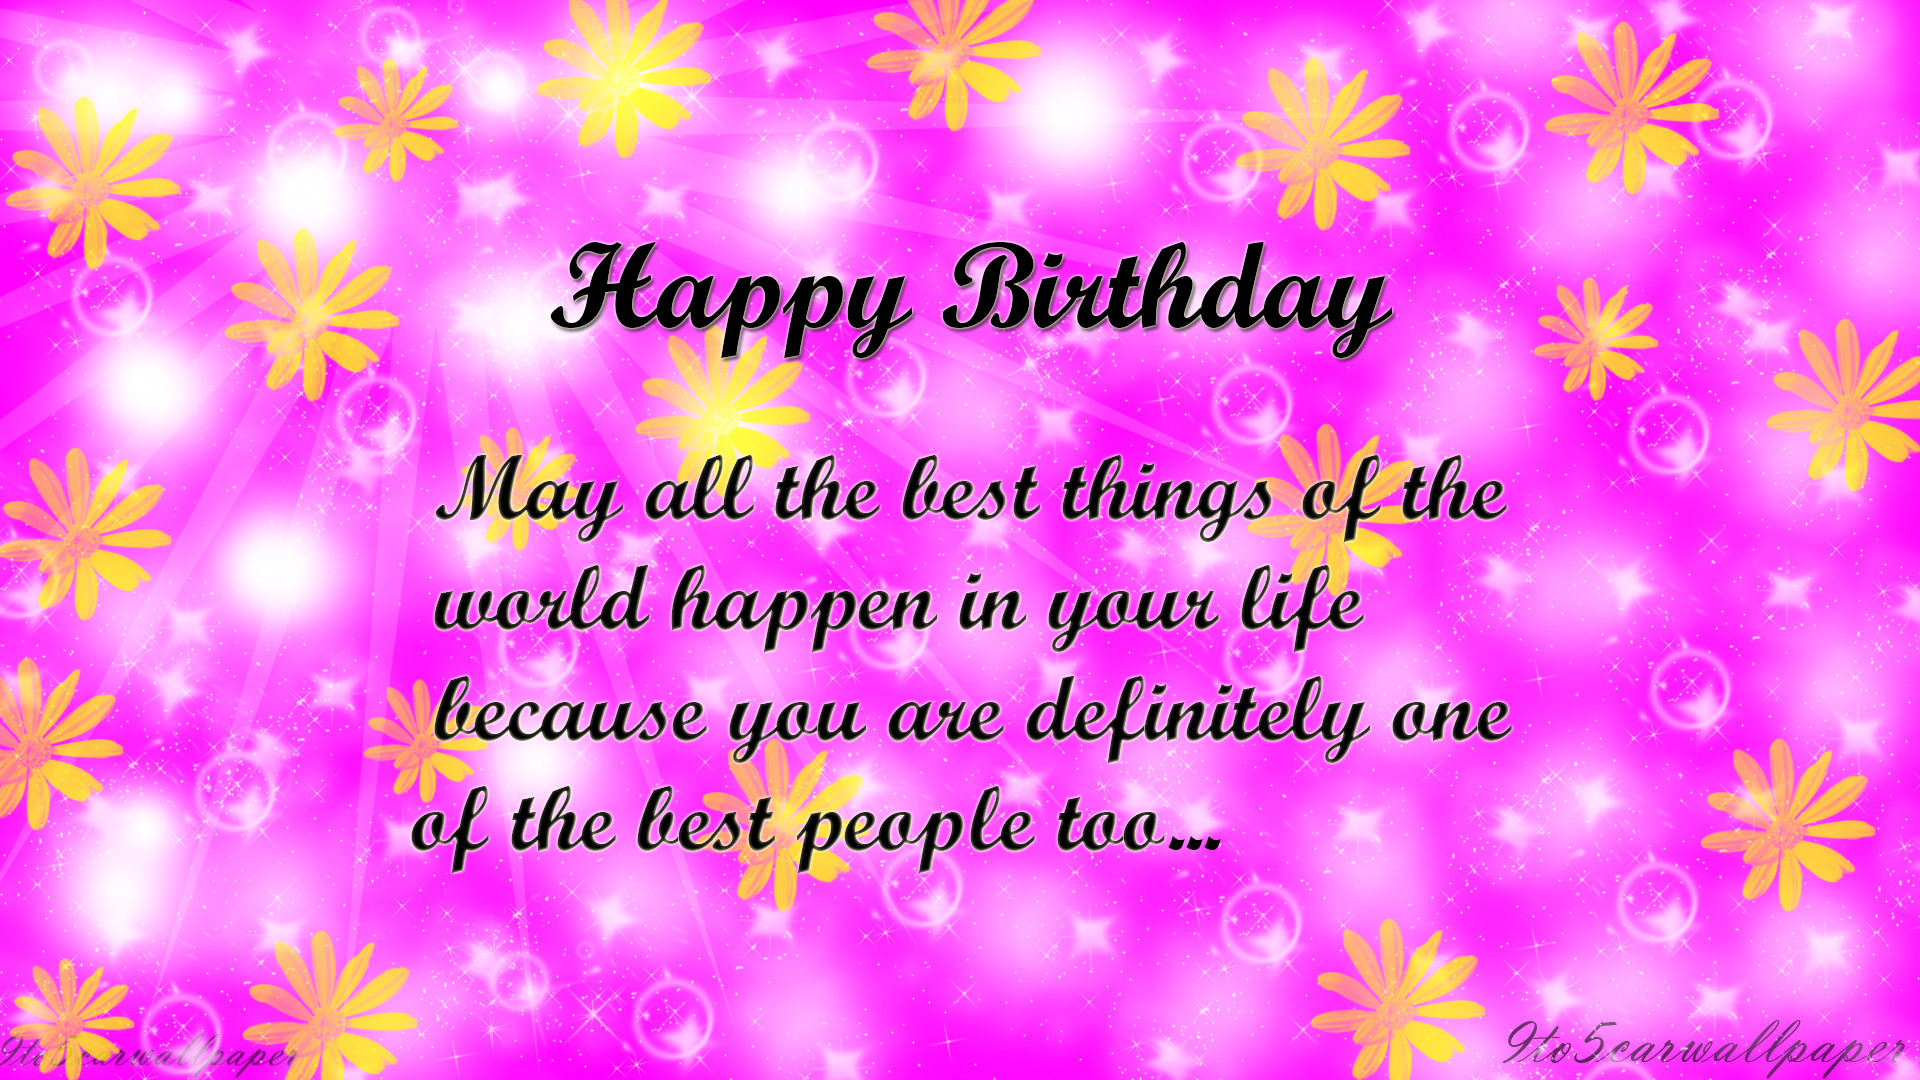 Birthday Images With Quotes
 Best Birthday Quotes and Wallpapers My Site